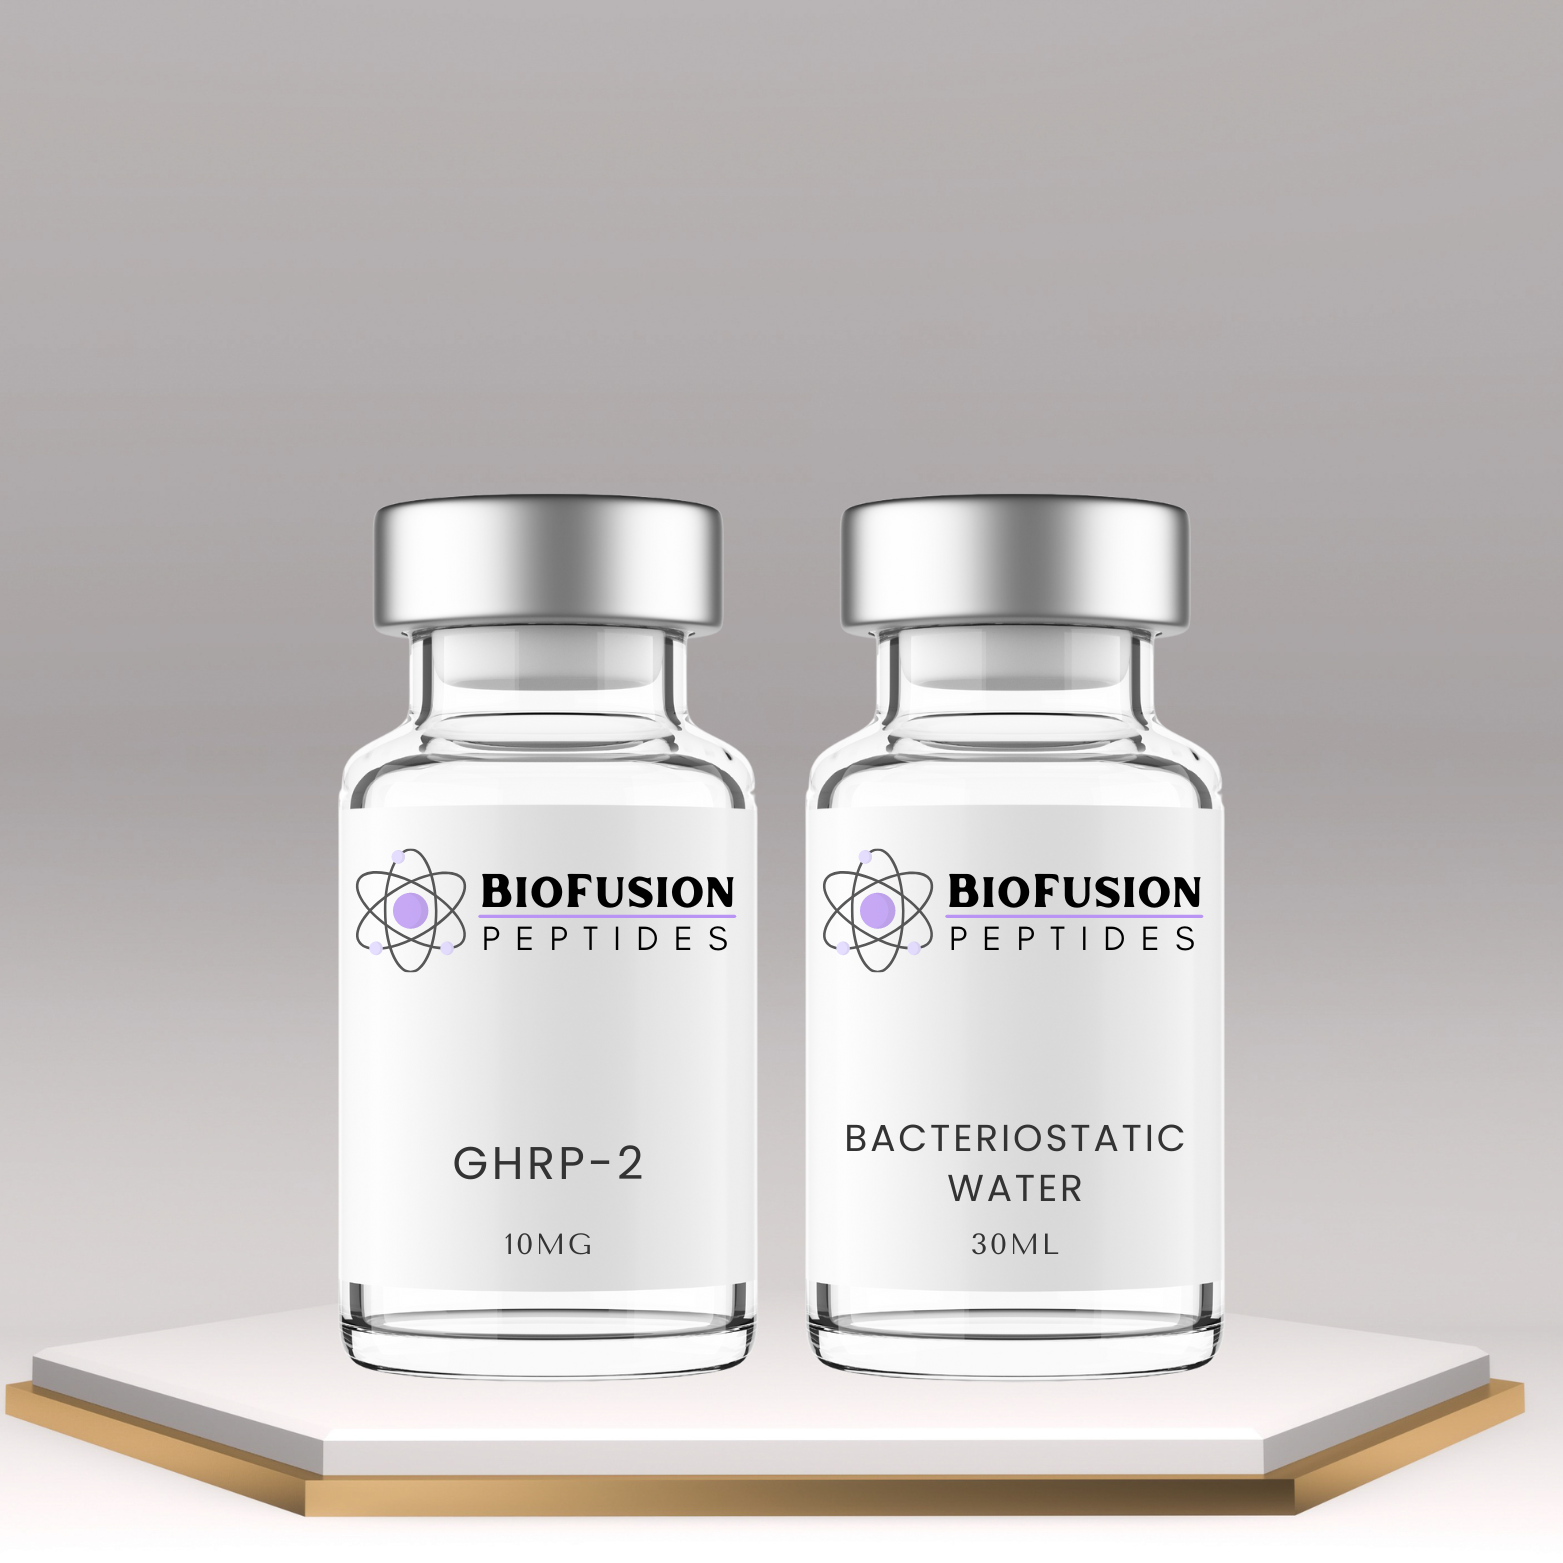 BioFusion Peptides GHRP-2 kit with bacteriostatic water